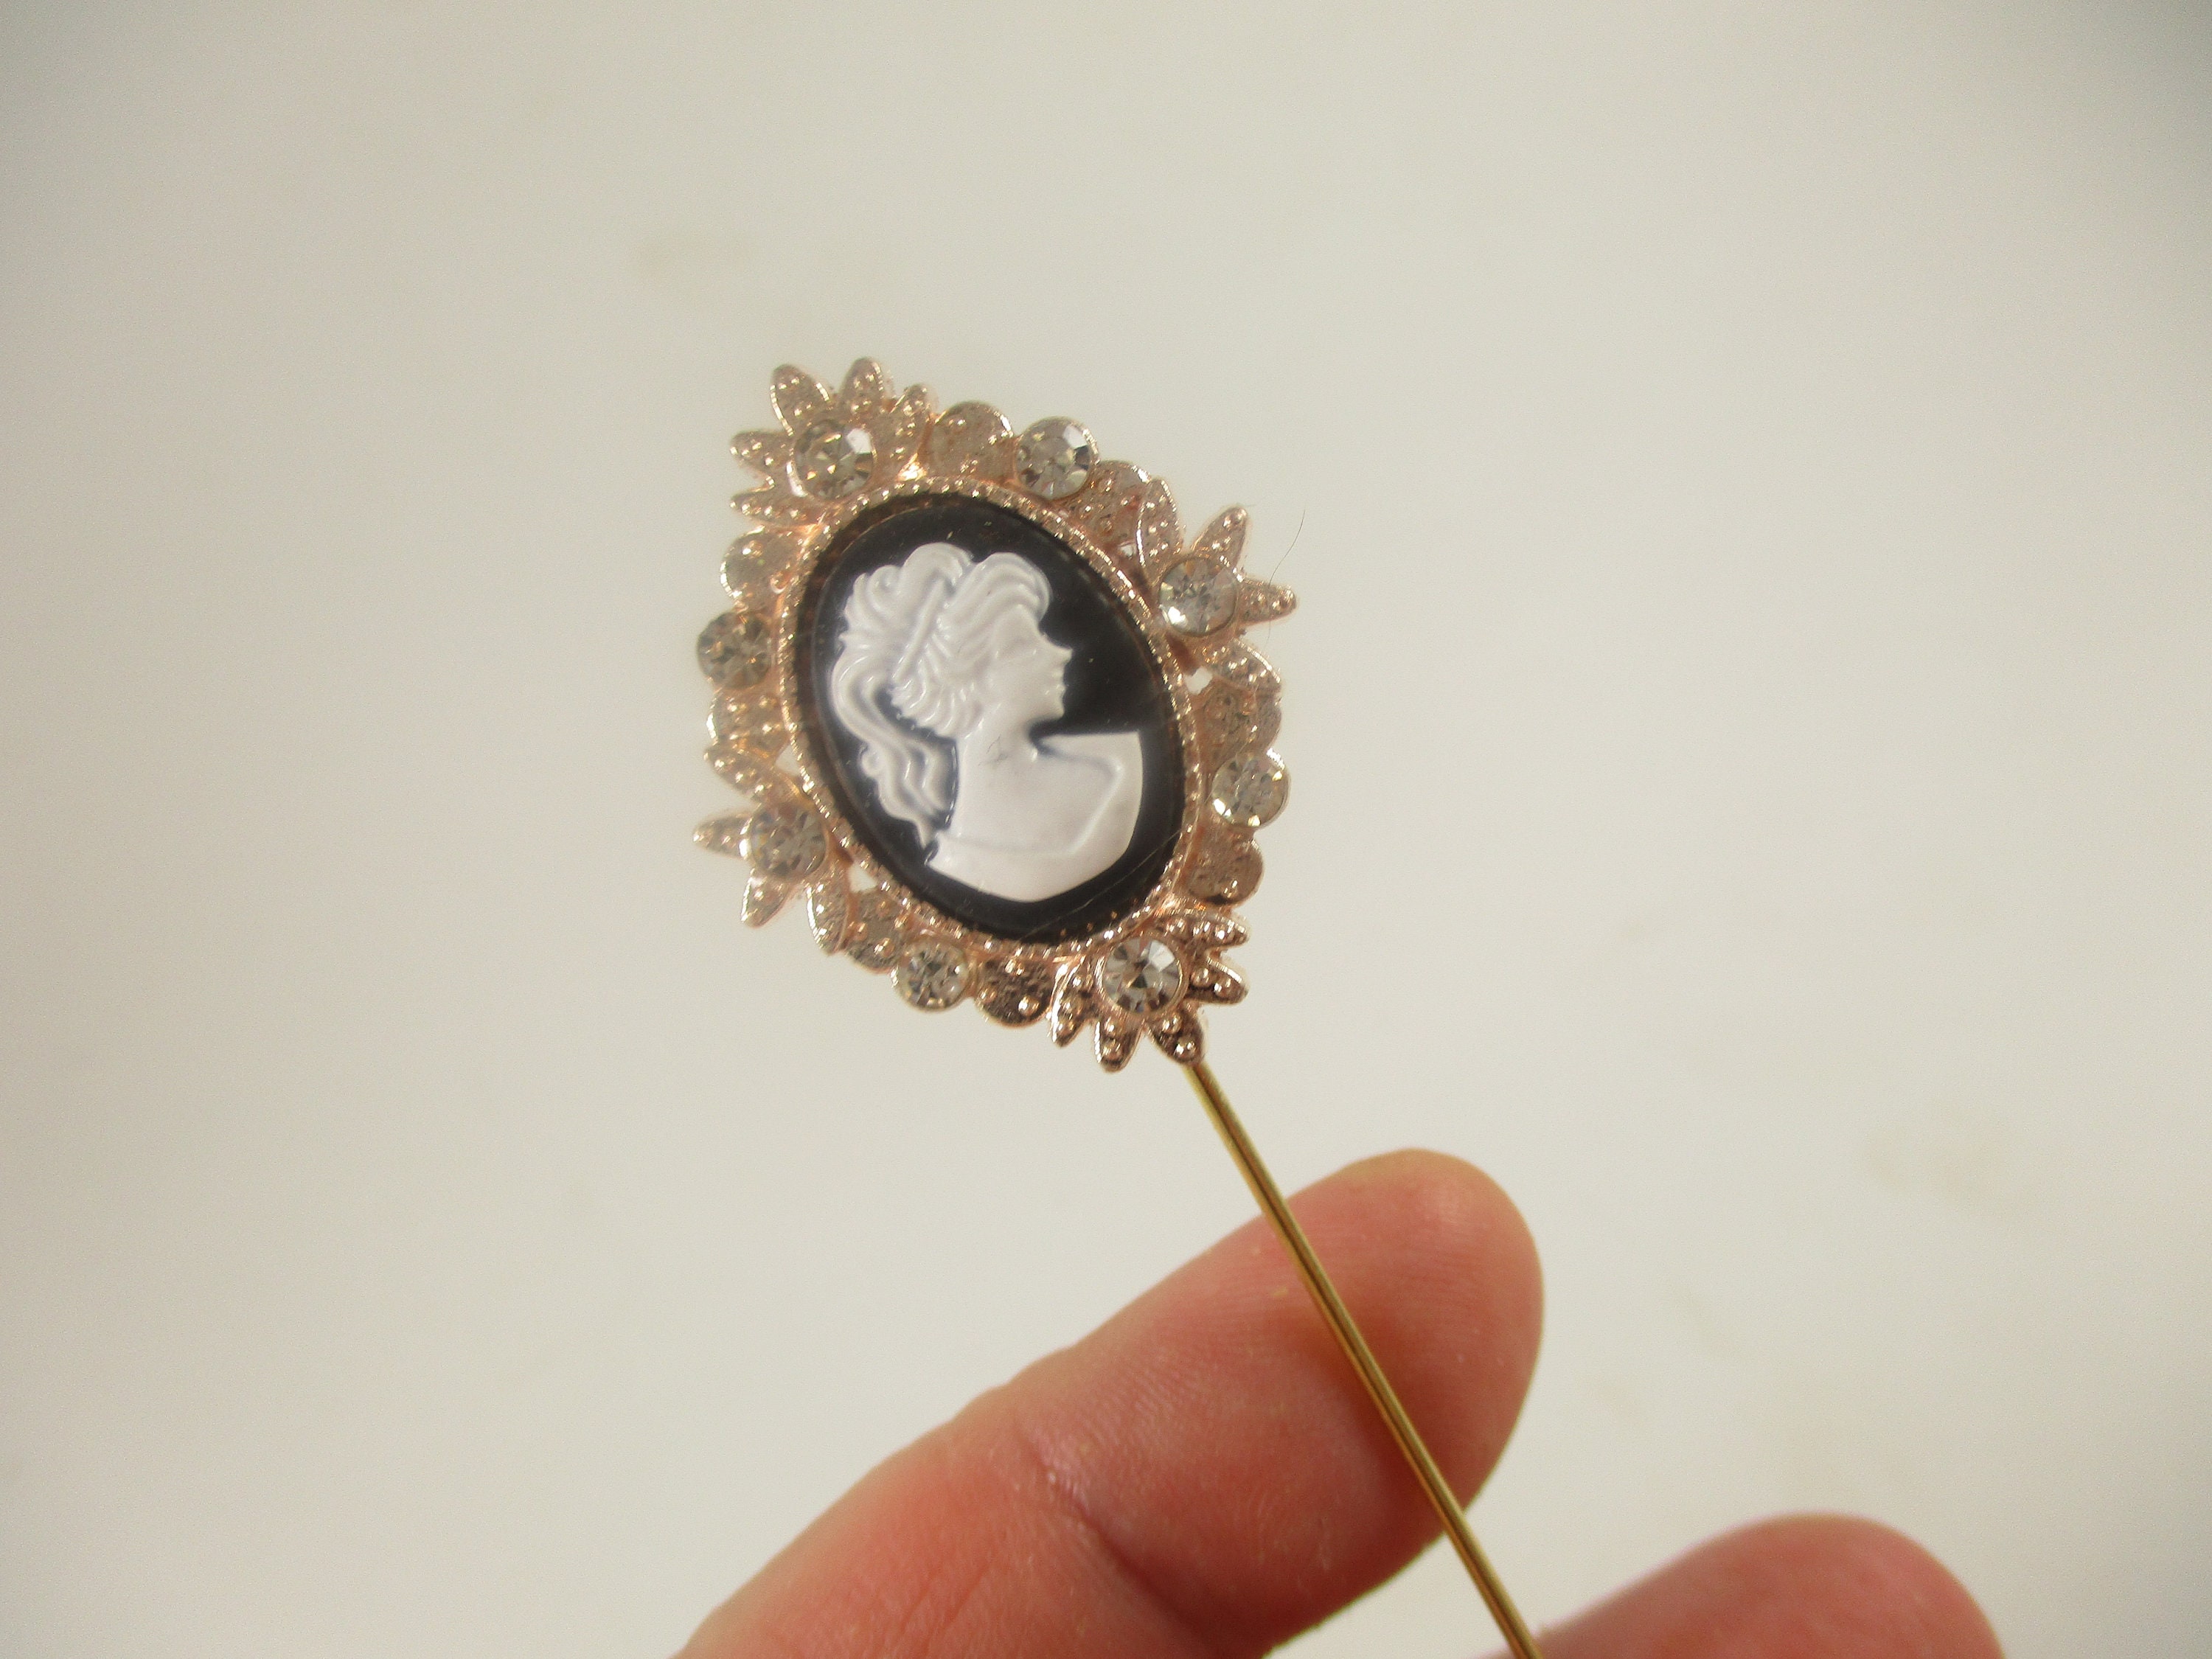 Charming vintage Victorian style cameo stick pin hat pin Gift for her.